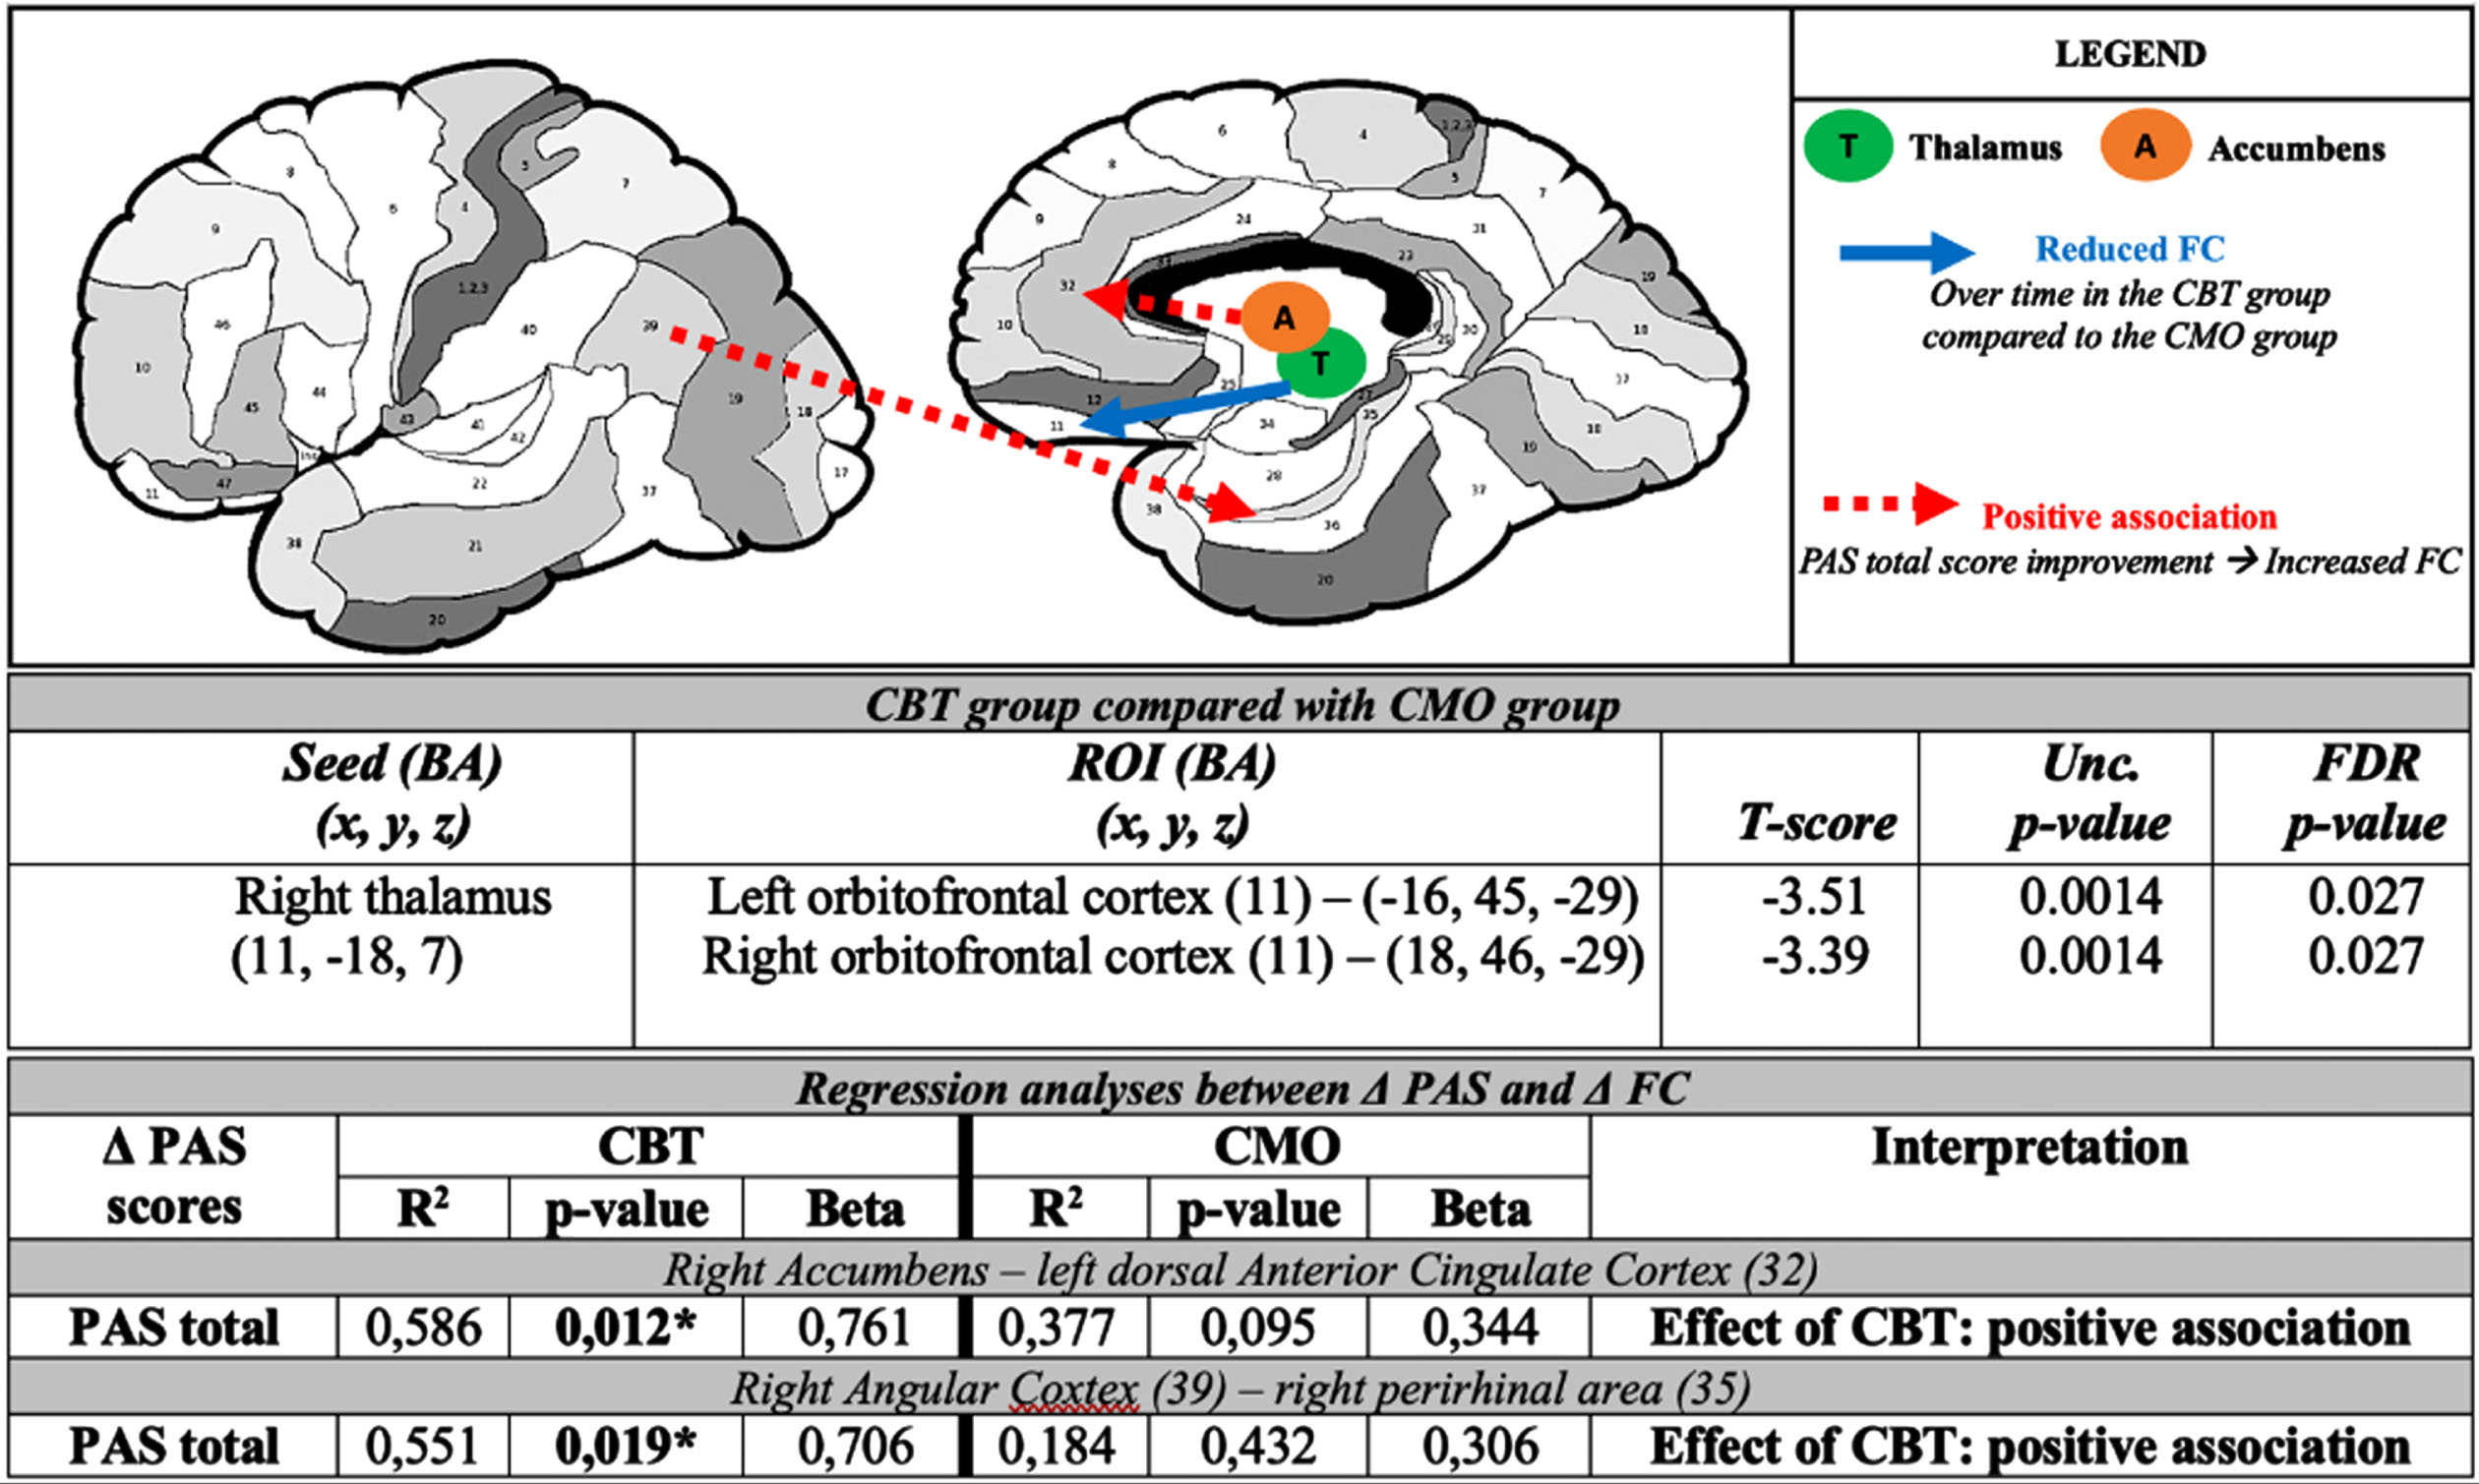 Representation of the induced functional connectivity changes after cognitive behavioral therapy in Parkinson’s disease related anxiety circuits and corresponding tables of statistical results. BA, Brodmann area; CBT, cognitive behavioral therapy; CMO, clinical monitoring only; FC, functional connectivity; PAS, Parkinson anxiety scale; Unc., uncorrected. (image credits: http://www.fmriconsulting.com/brodmann/)